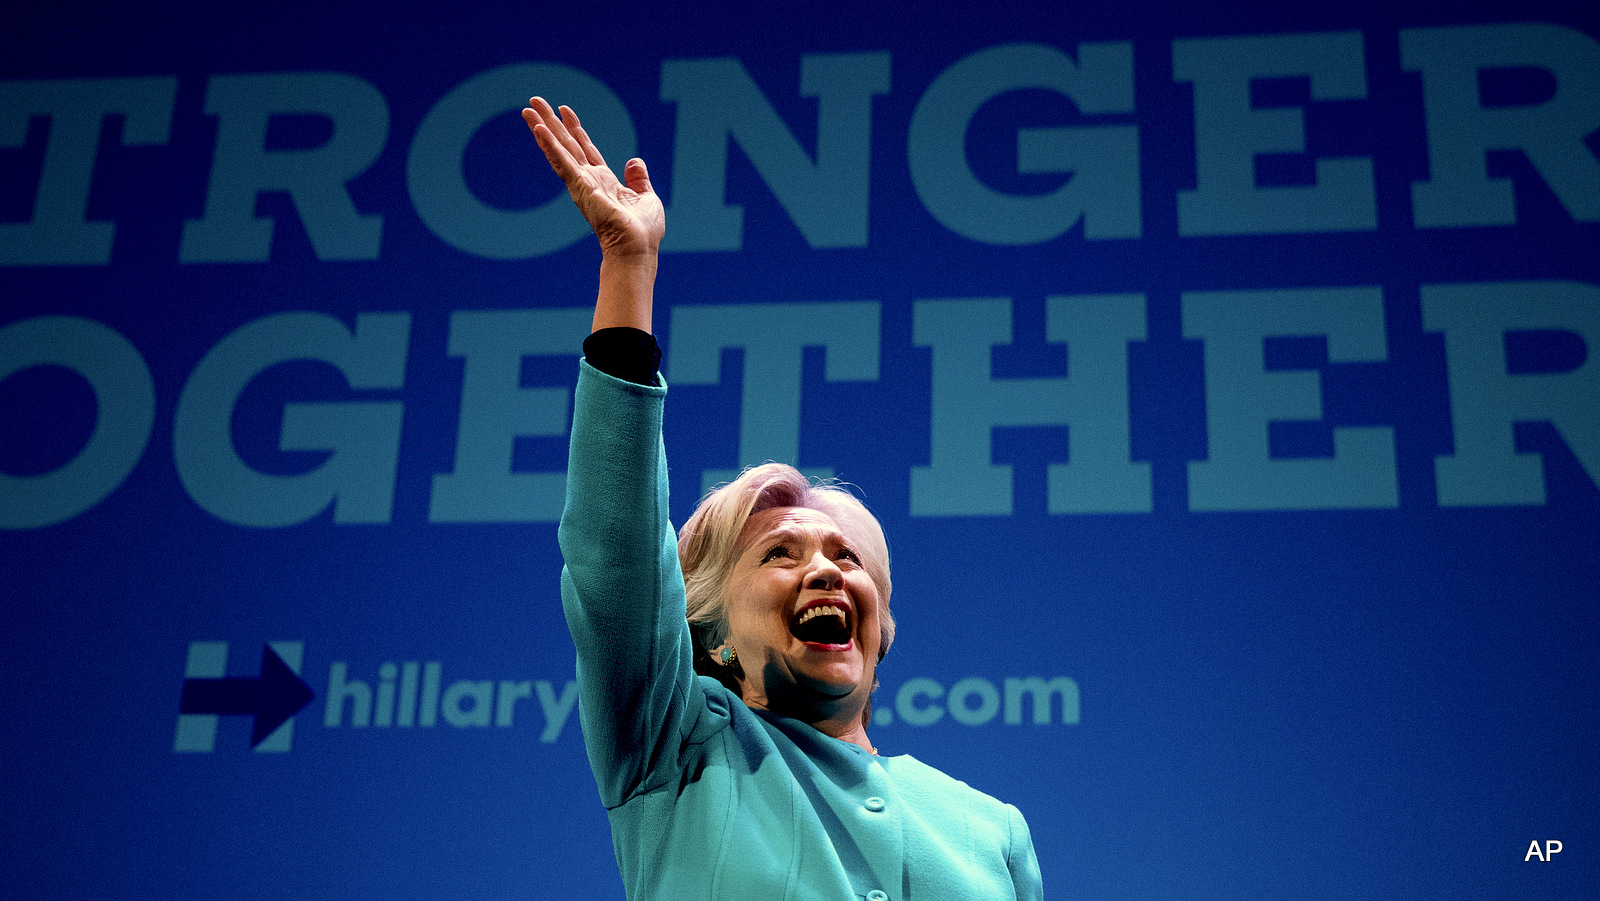 Democratic presidential candidate Hillary Clinton waves as she takes the stage to speak at a fundraiser at the Paramount Theatre in Seattle, Friday, Oct. 14, 2016. 